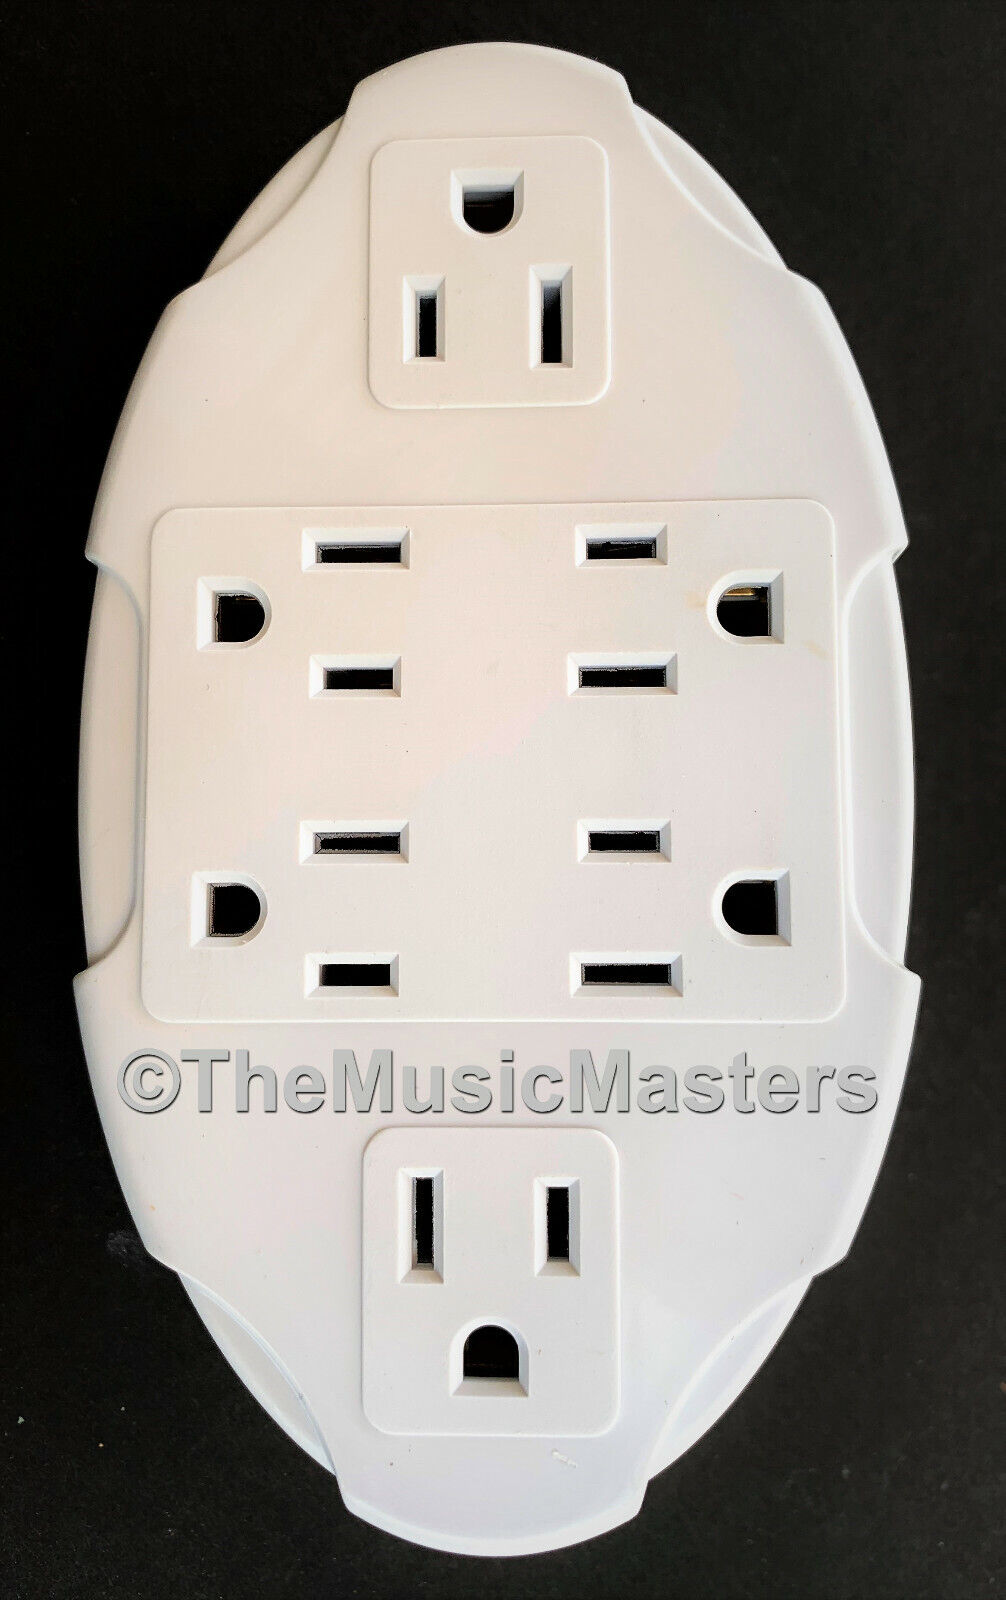 6 Outlet Electrical Socket Adapter Cover Oval 6-Way AC Wall Plug Power Splitter